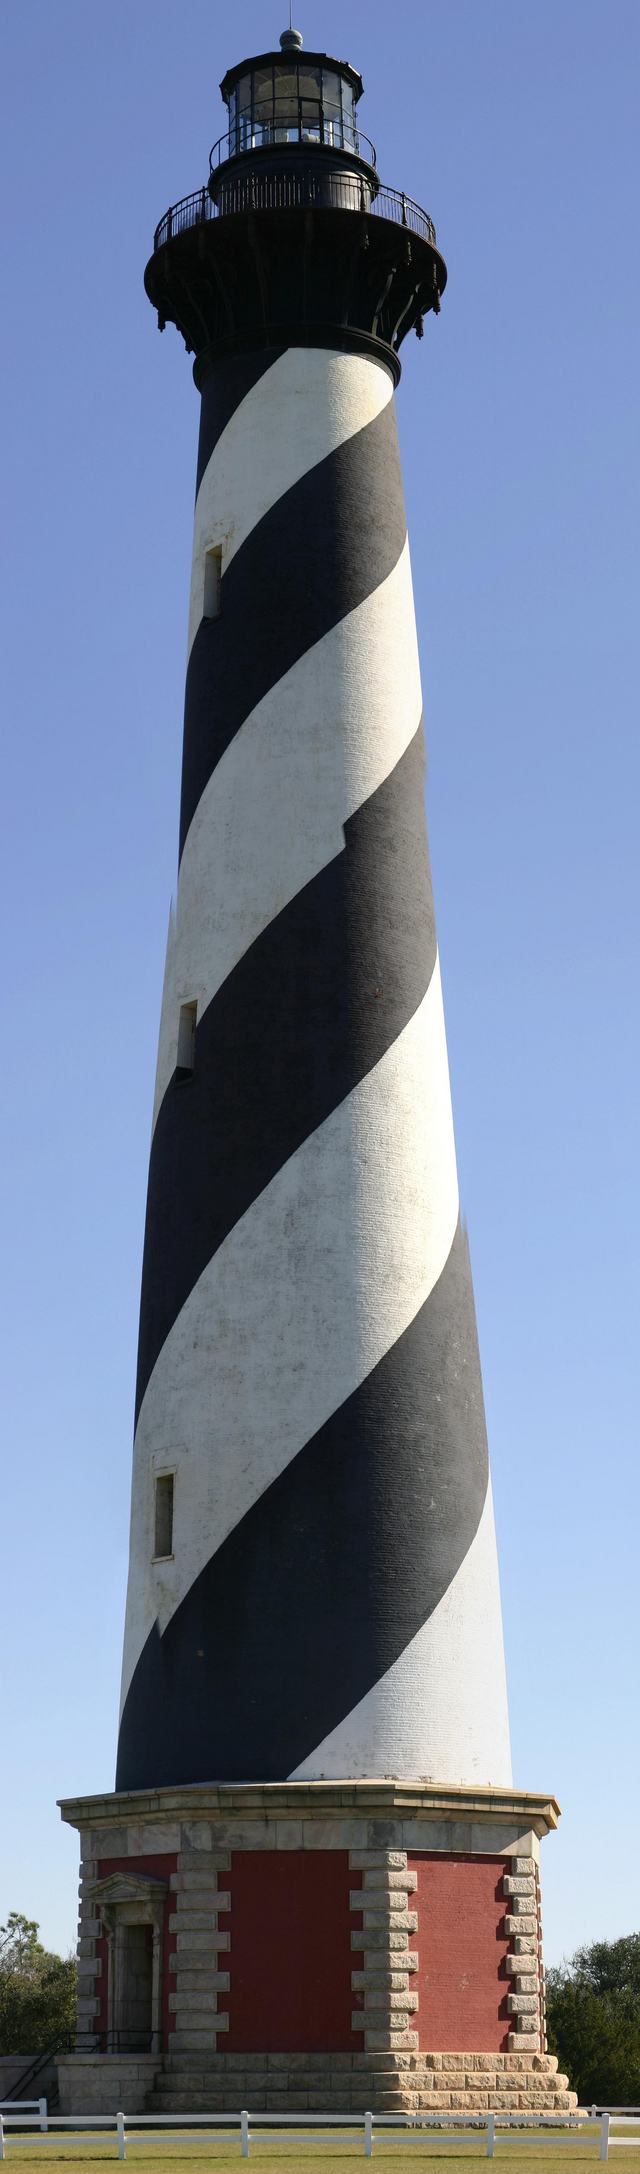 ../pictures/Hatteras_lighthouse_collage.jpg